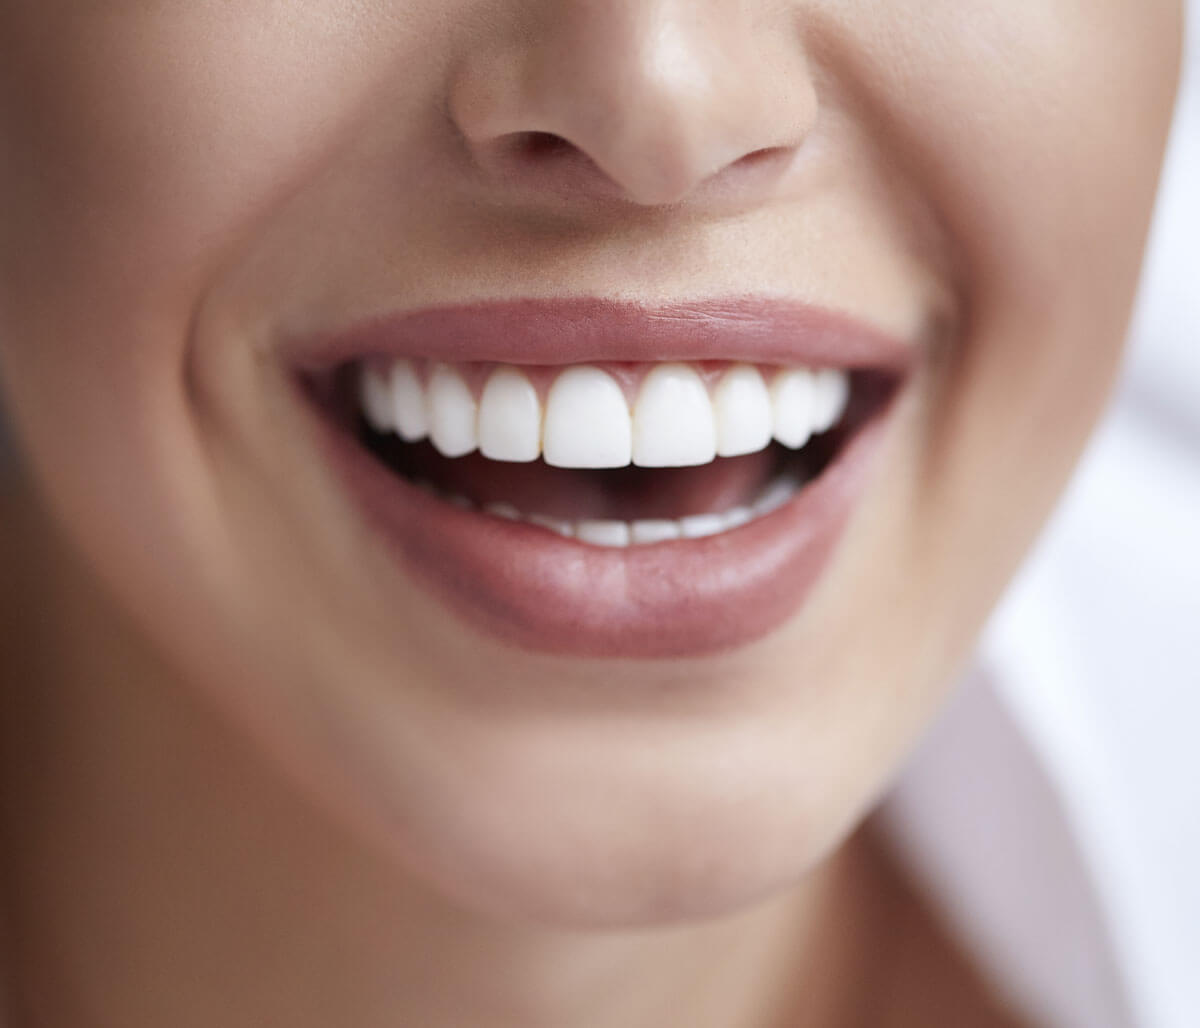 Bloomington, IL patients smile brighter with Zoom! Teeth whitening